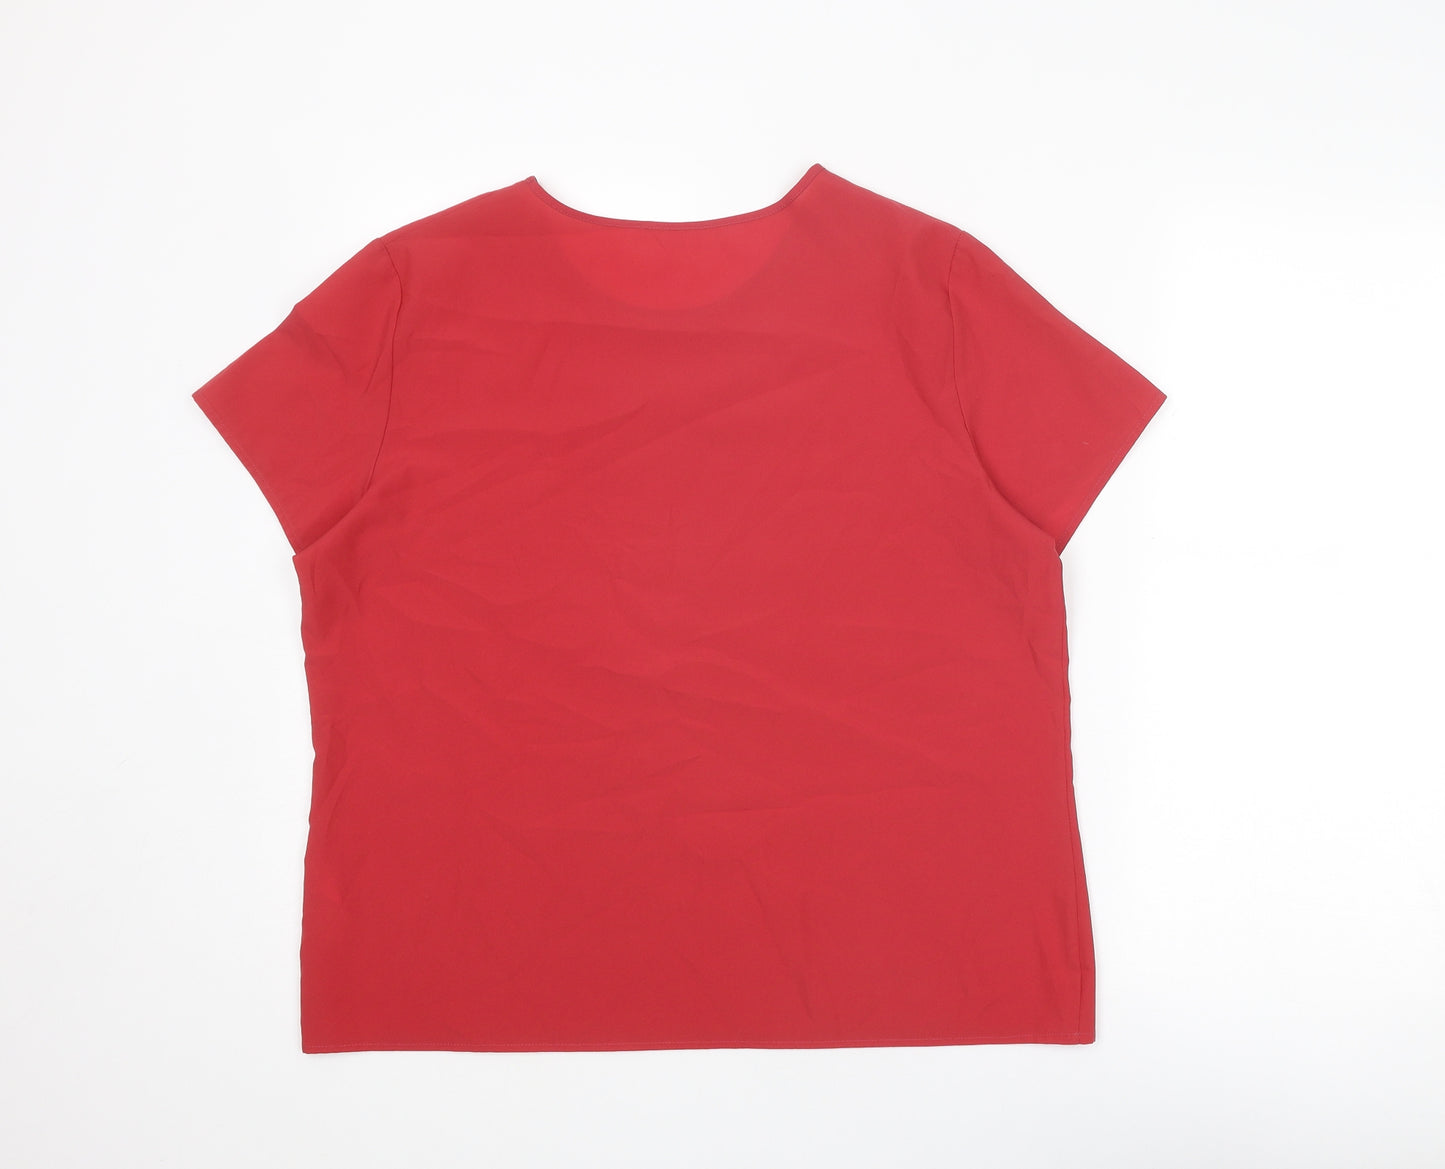 BHS Womens Red Polyester Basic T-Shirt Size 18 Round Neck